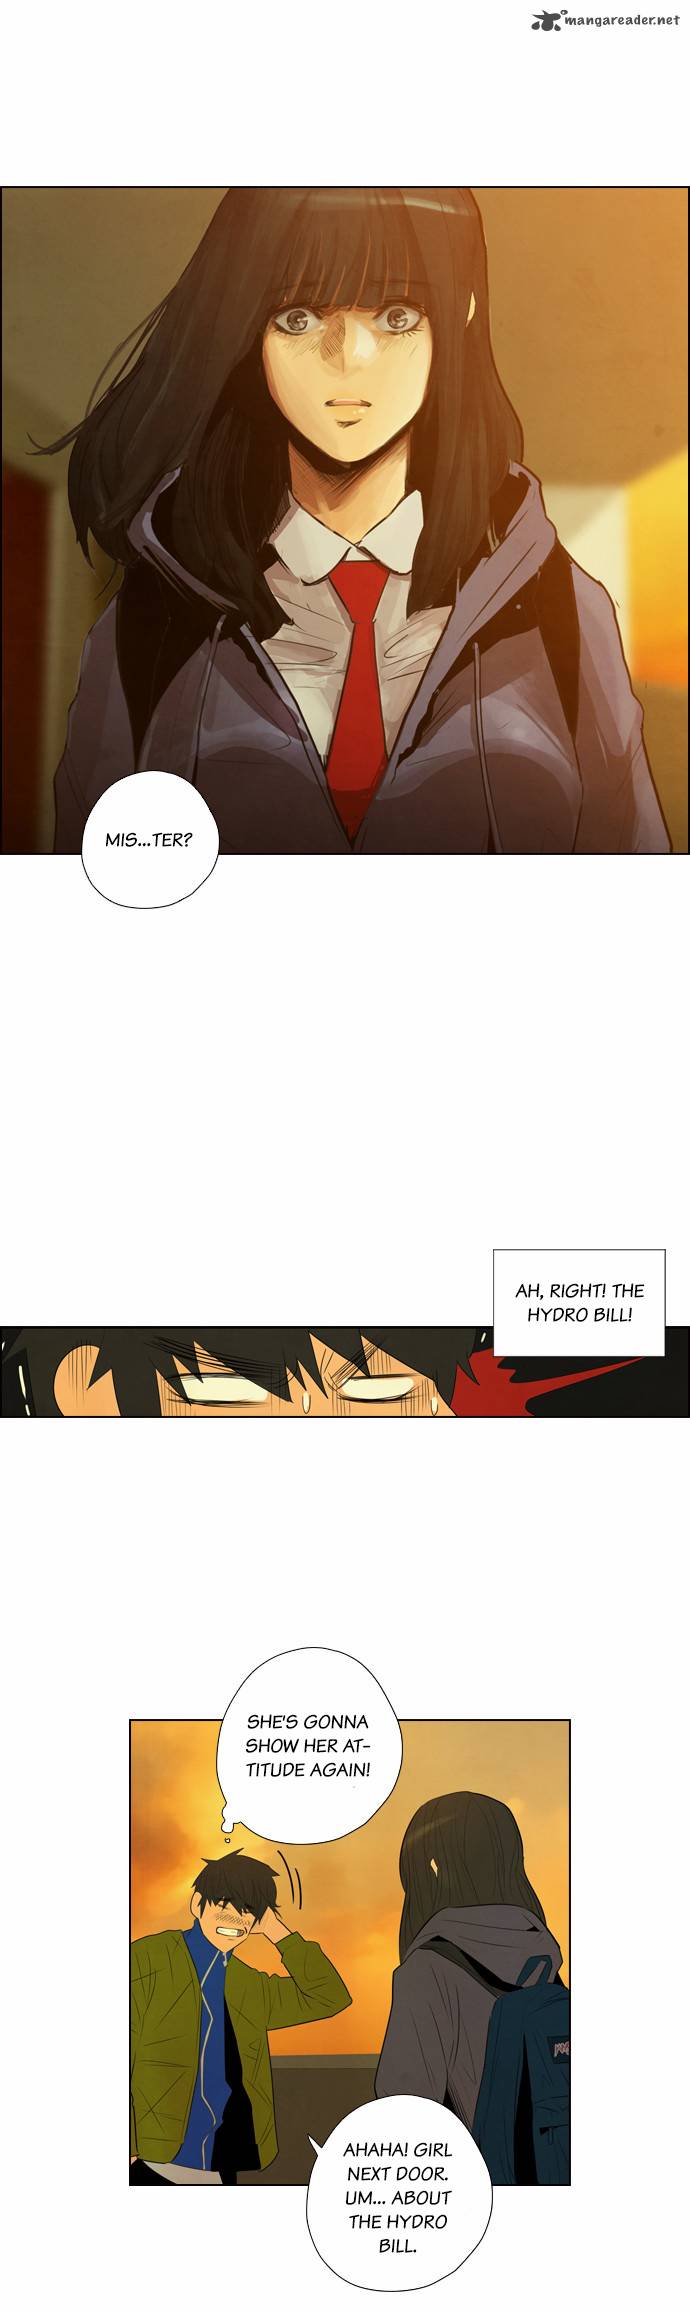 Revival Man Chapter 2 Page 43